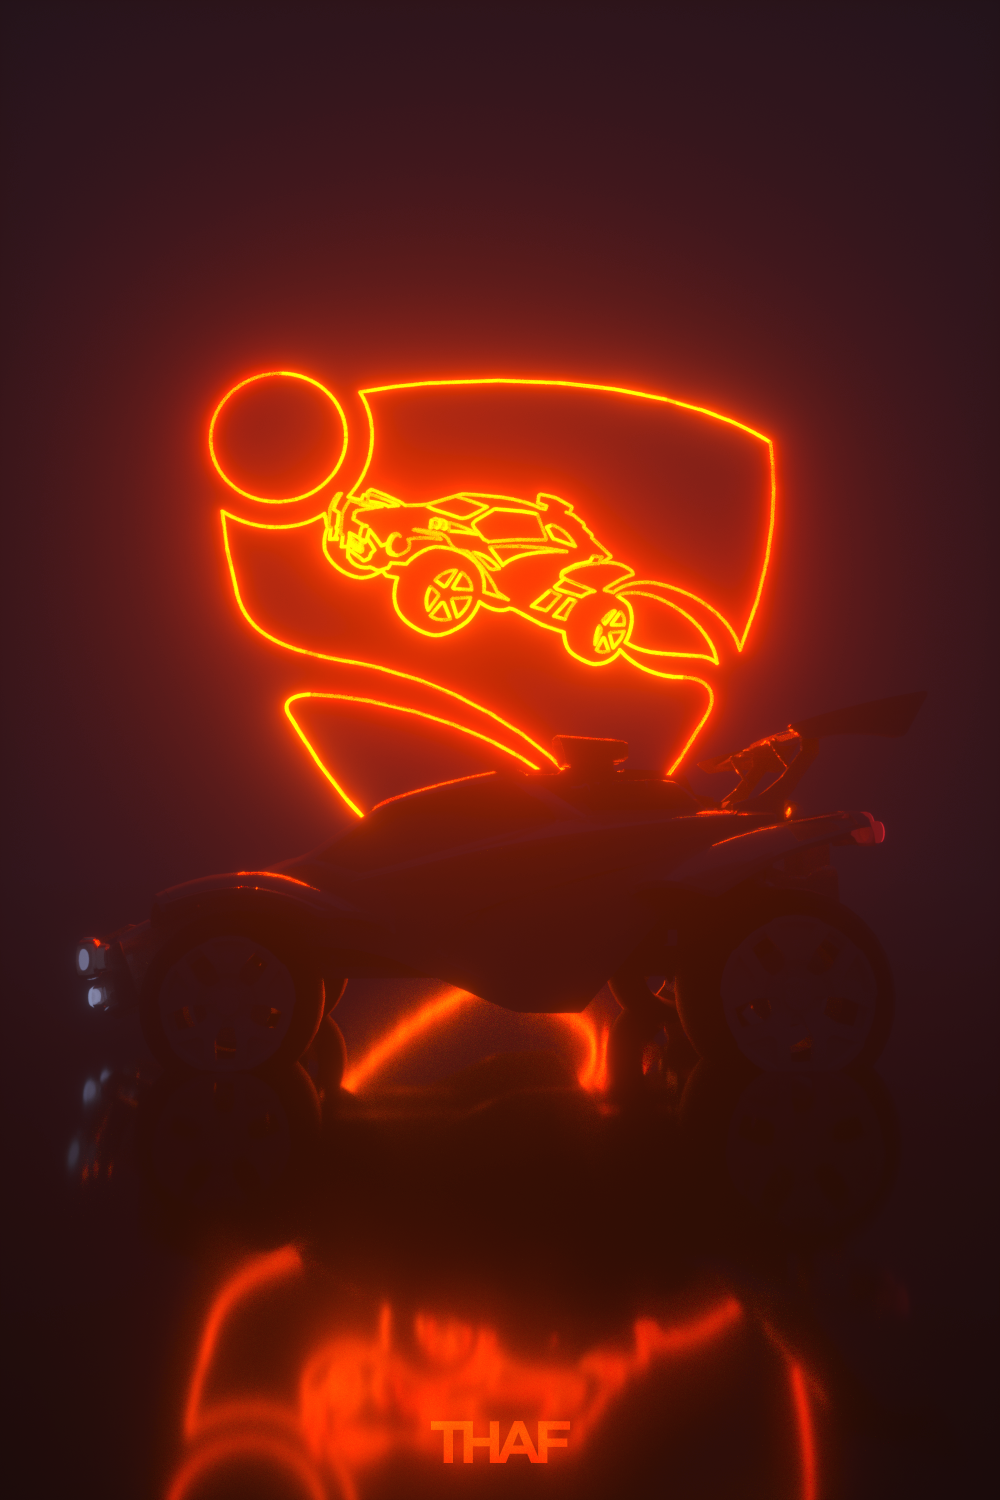 T9 LEAGUE. Render for Octane car in Octane render. Feedback appreciated! Experimented with lighting and subsurface scattering on this one in particular. (Can be used as phone background)